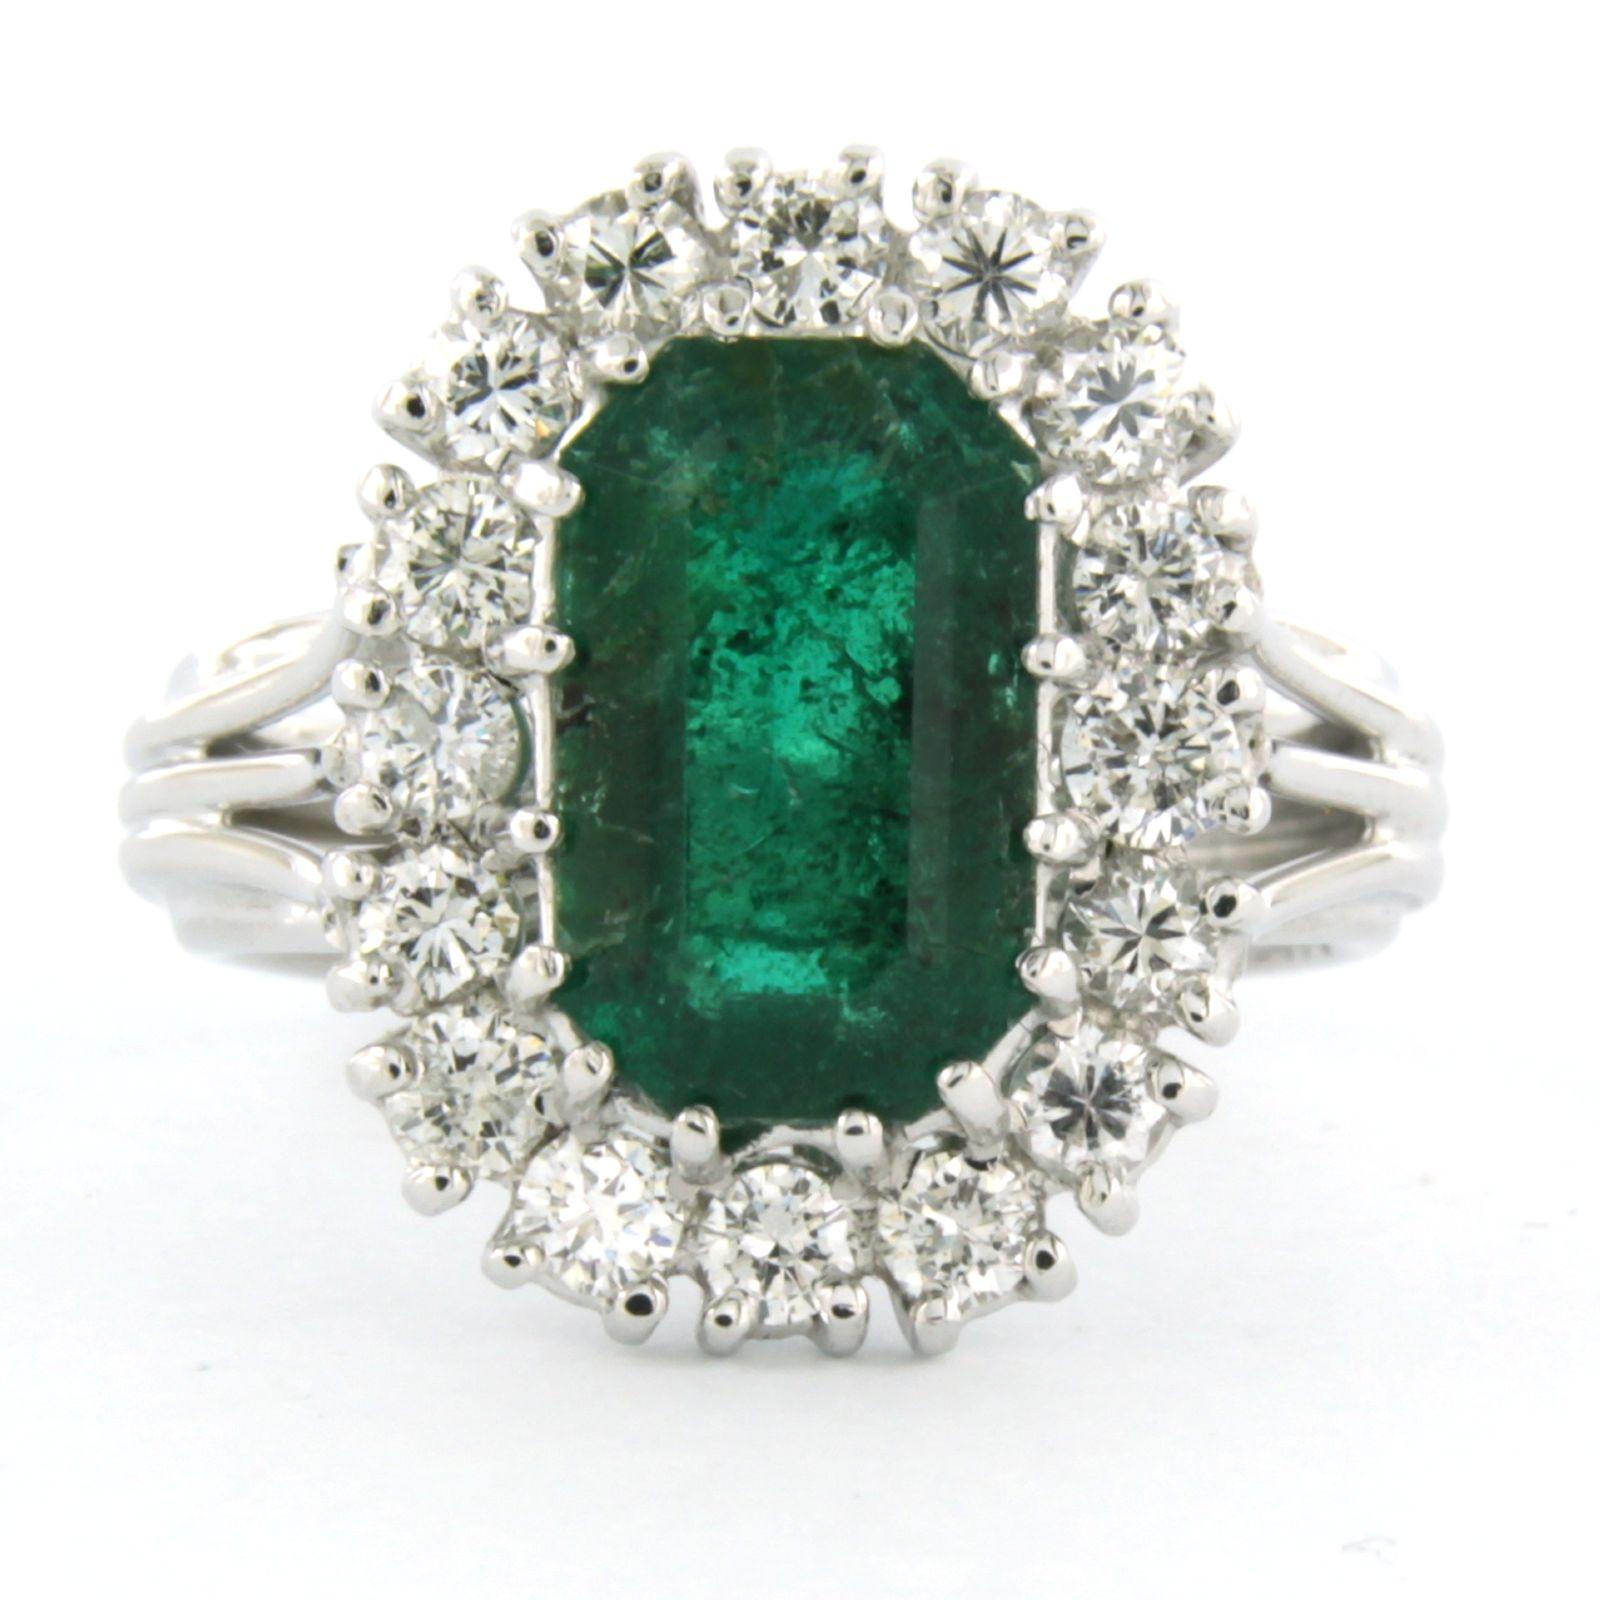 14k white gold cluster ring set with emerald up to 3.00ct and surrounded by brilliant cut diamonds up to . 0.70ct - F/G - VS/SI - ring size U.S. 8 – EU. 18.25(57)

detailed description:

The top of the ring is in a rectangle shape of 1.9 cm by 1.5